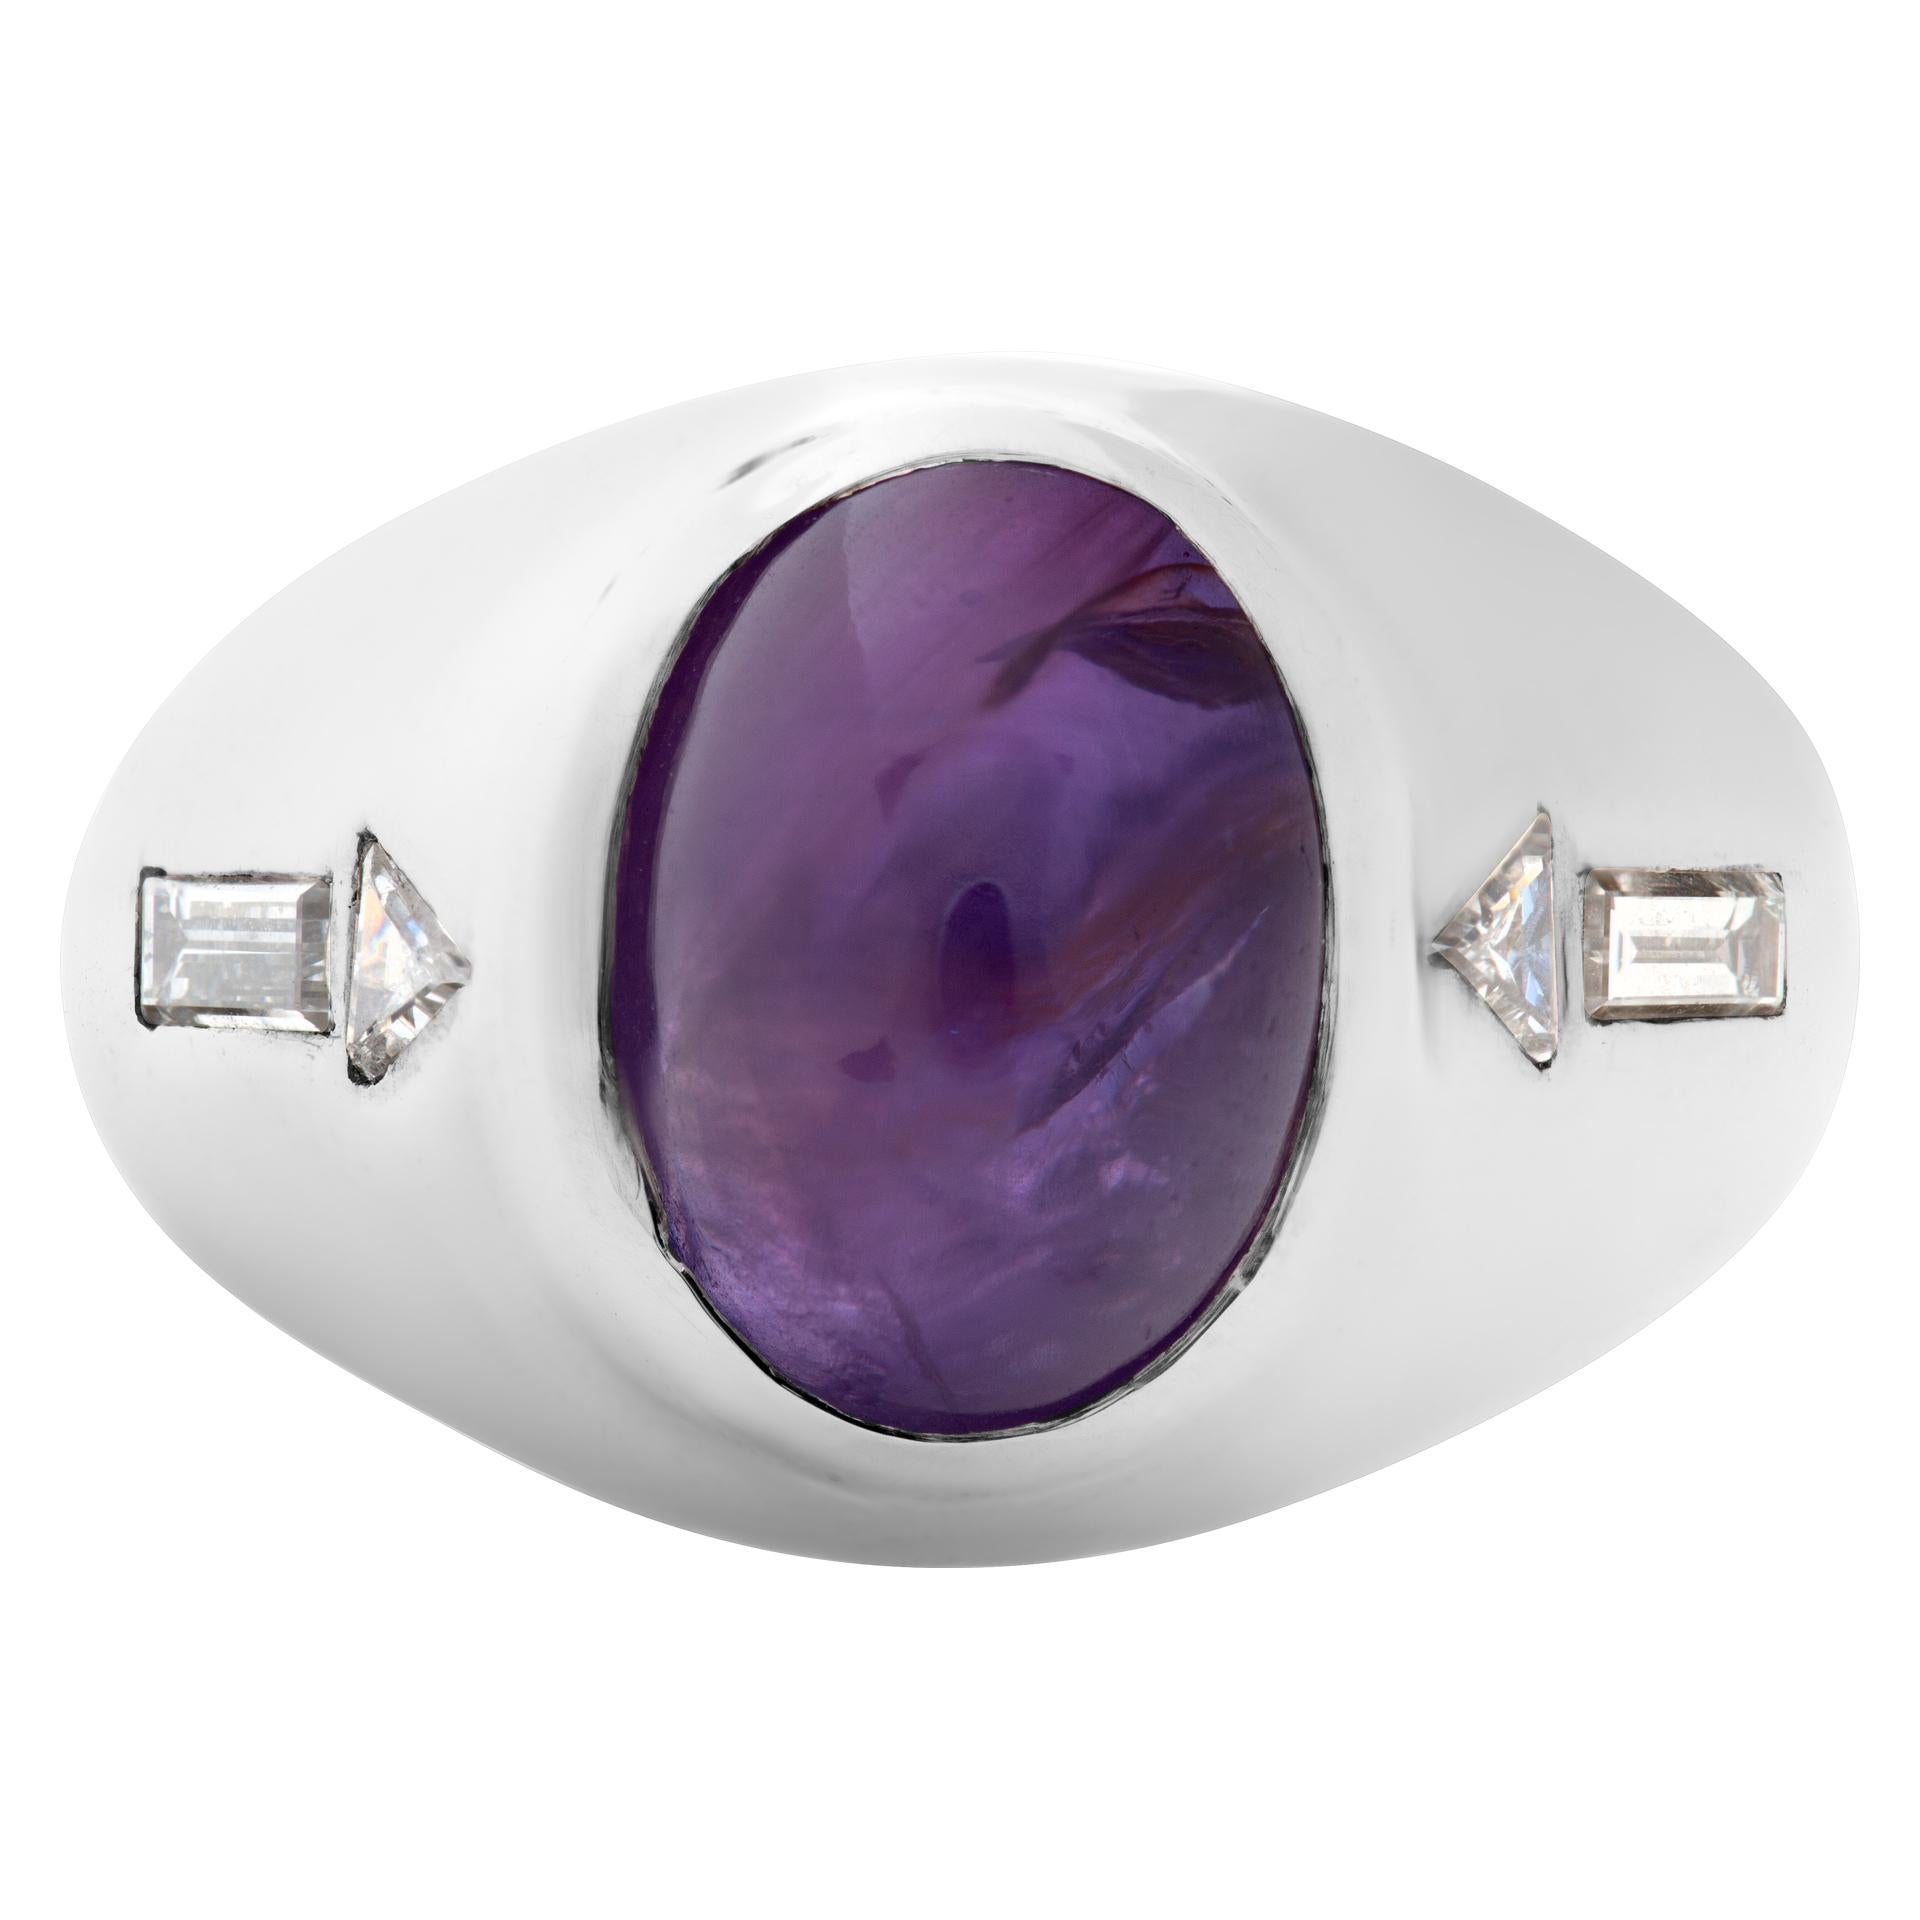 Beautiful Pirple Star Sapphire cabochon ring (app. 2 carats) set in 14k white gold with baguette and triangle diamond accents. Size 6.25. Width at head: 13.0mm, width at shank: 4.0mm.

This Sapphire ring is currently size 6.25 and some items can be